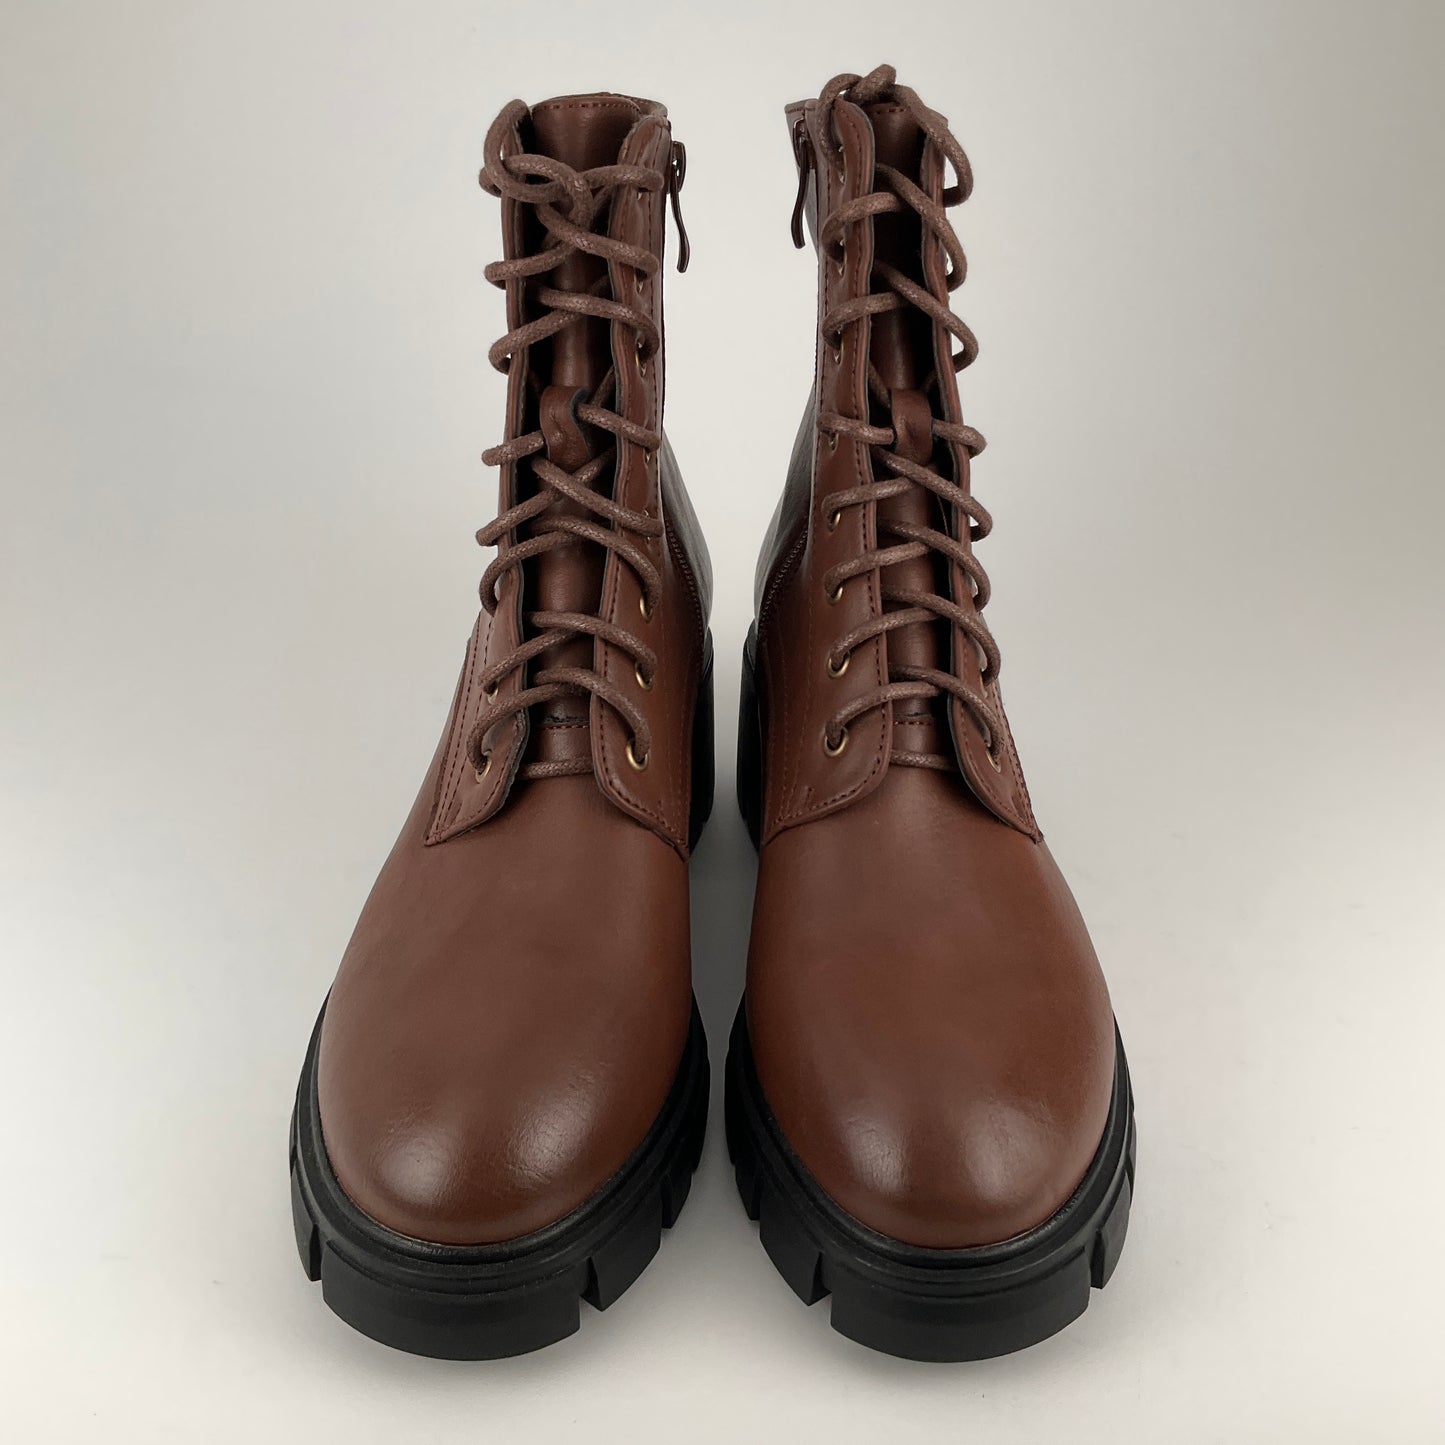 Celebrity - Boots - Size 9